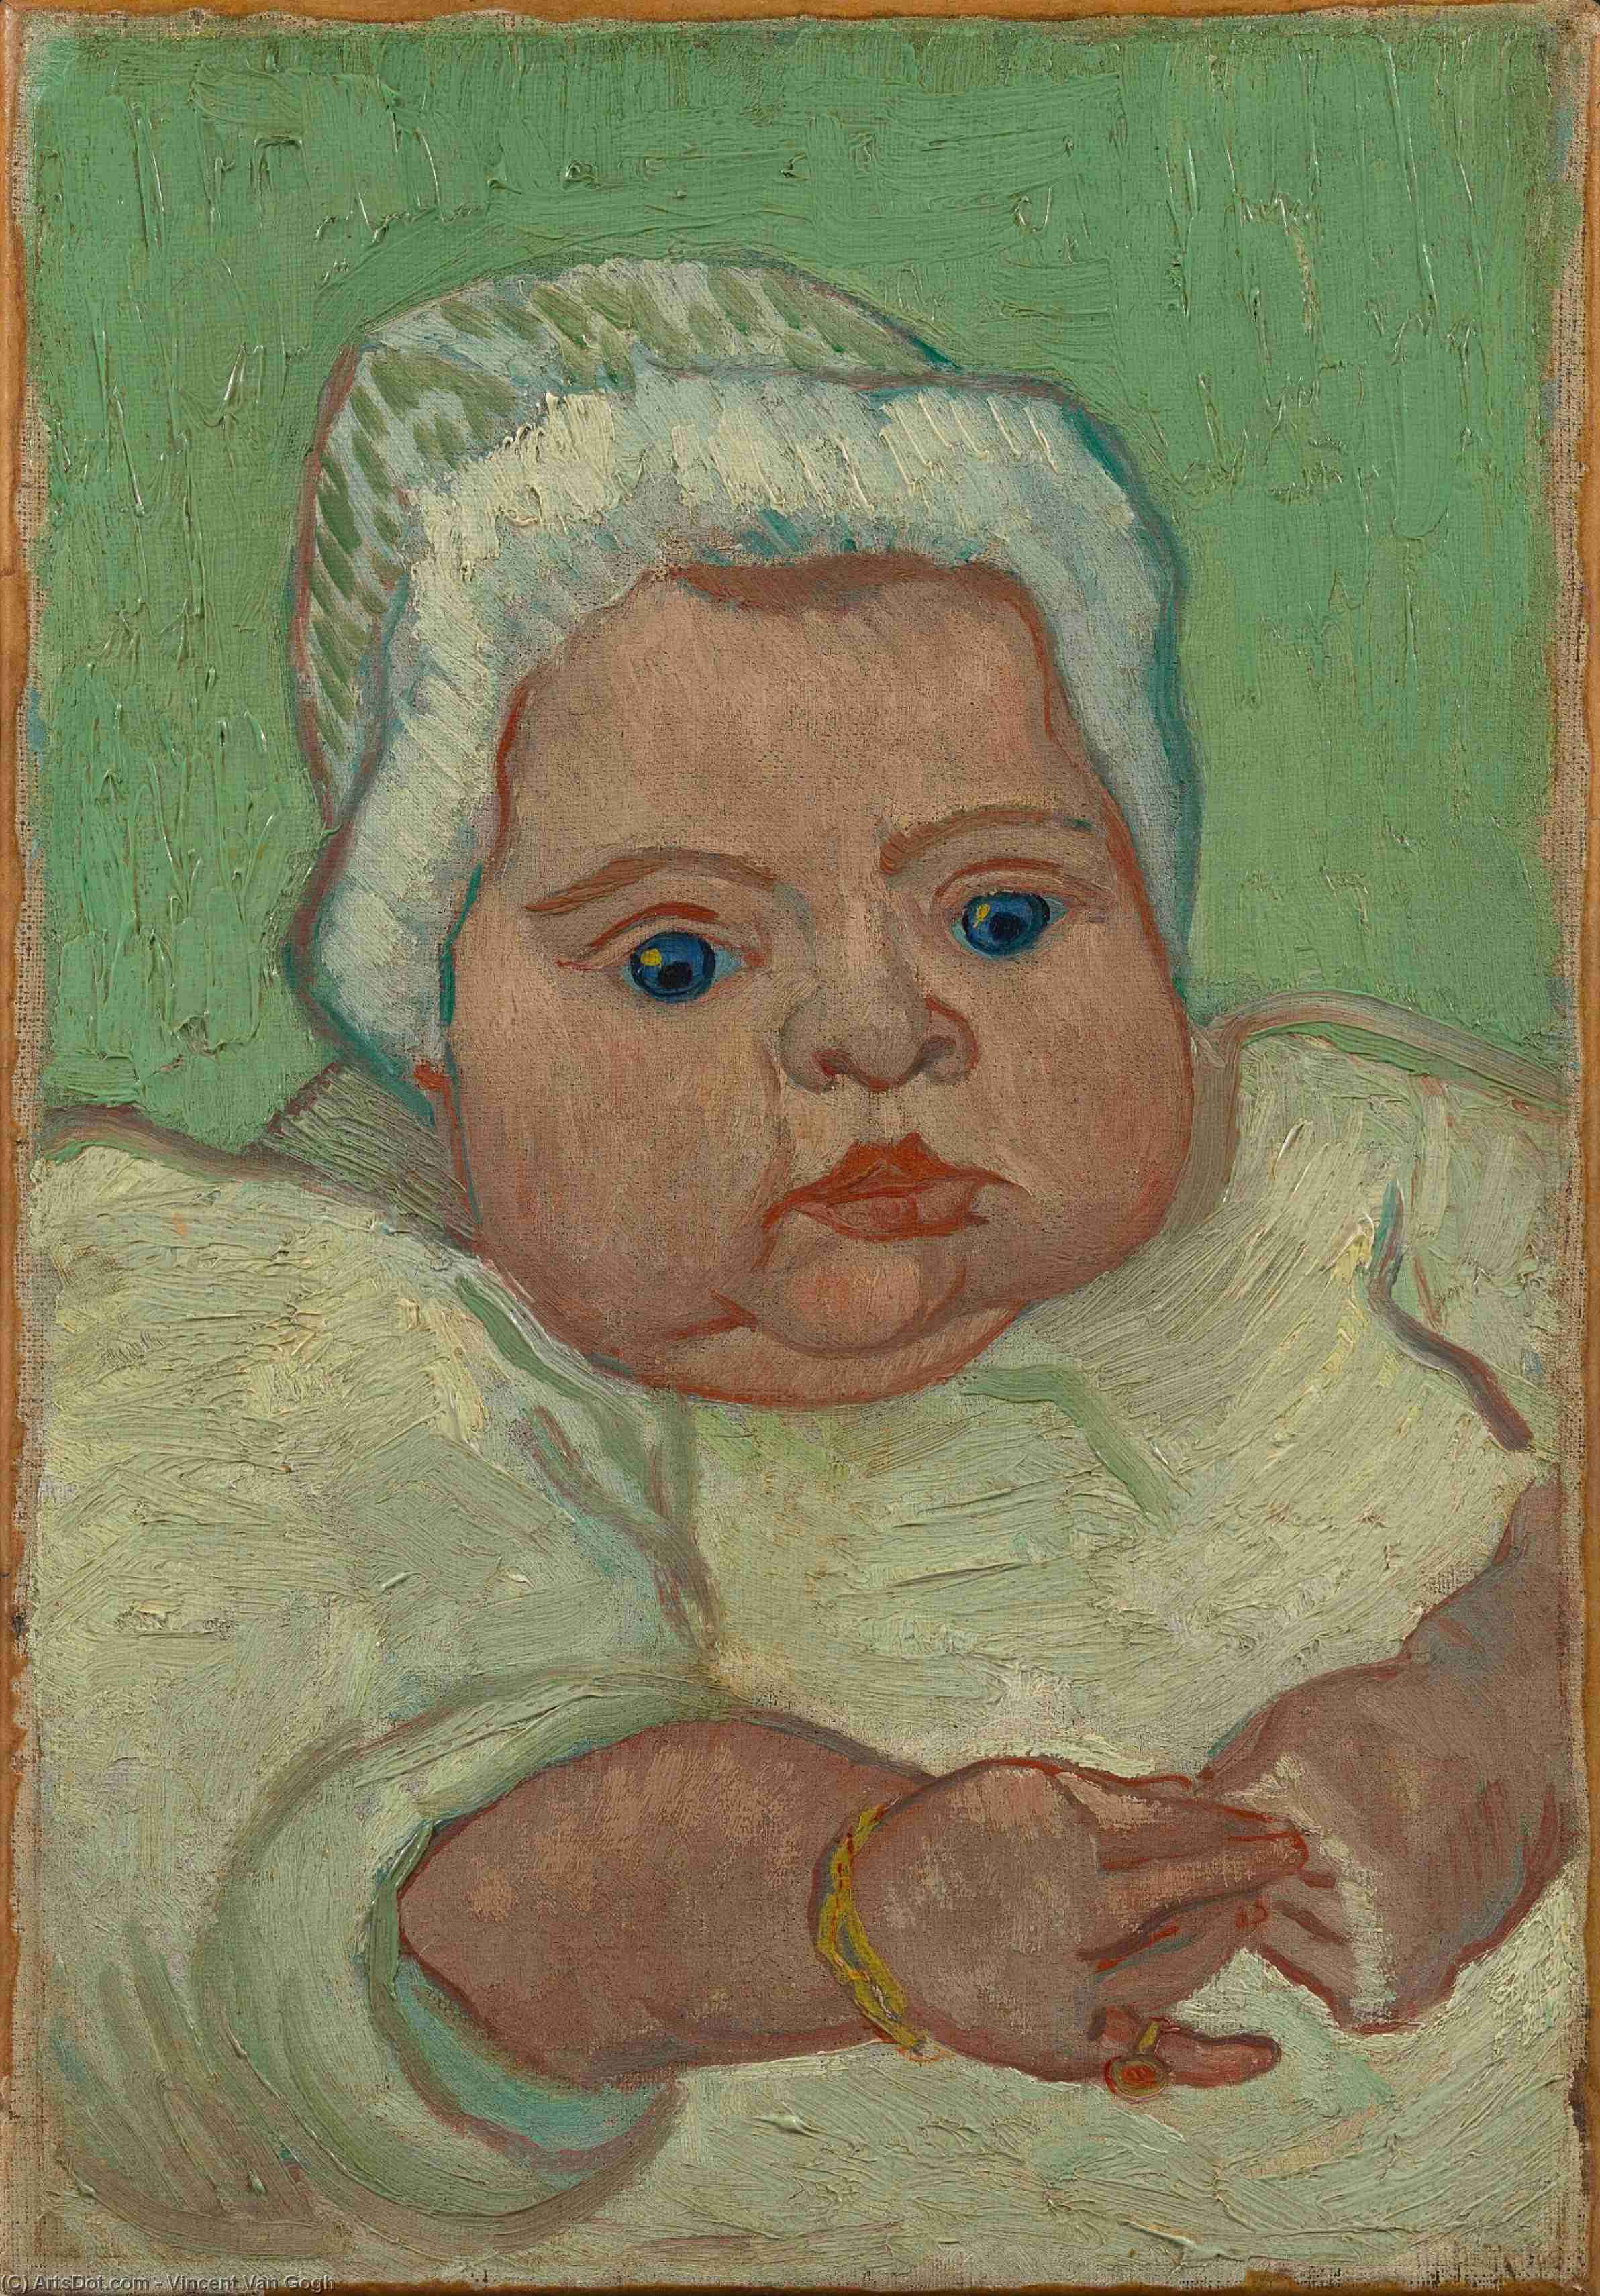  Oil Painting Replica Baby Marcelle Roulin, The by Vincent Van Gogh (1853-1890, Netherlands) | ArtsDot.com